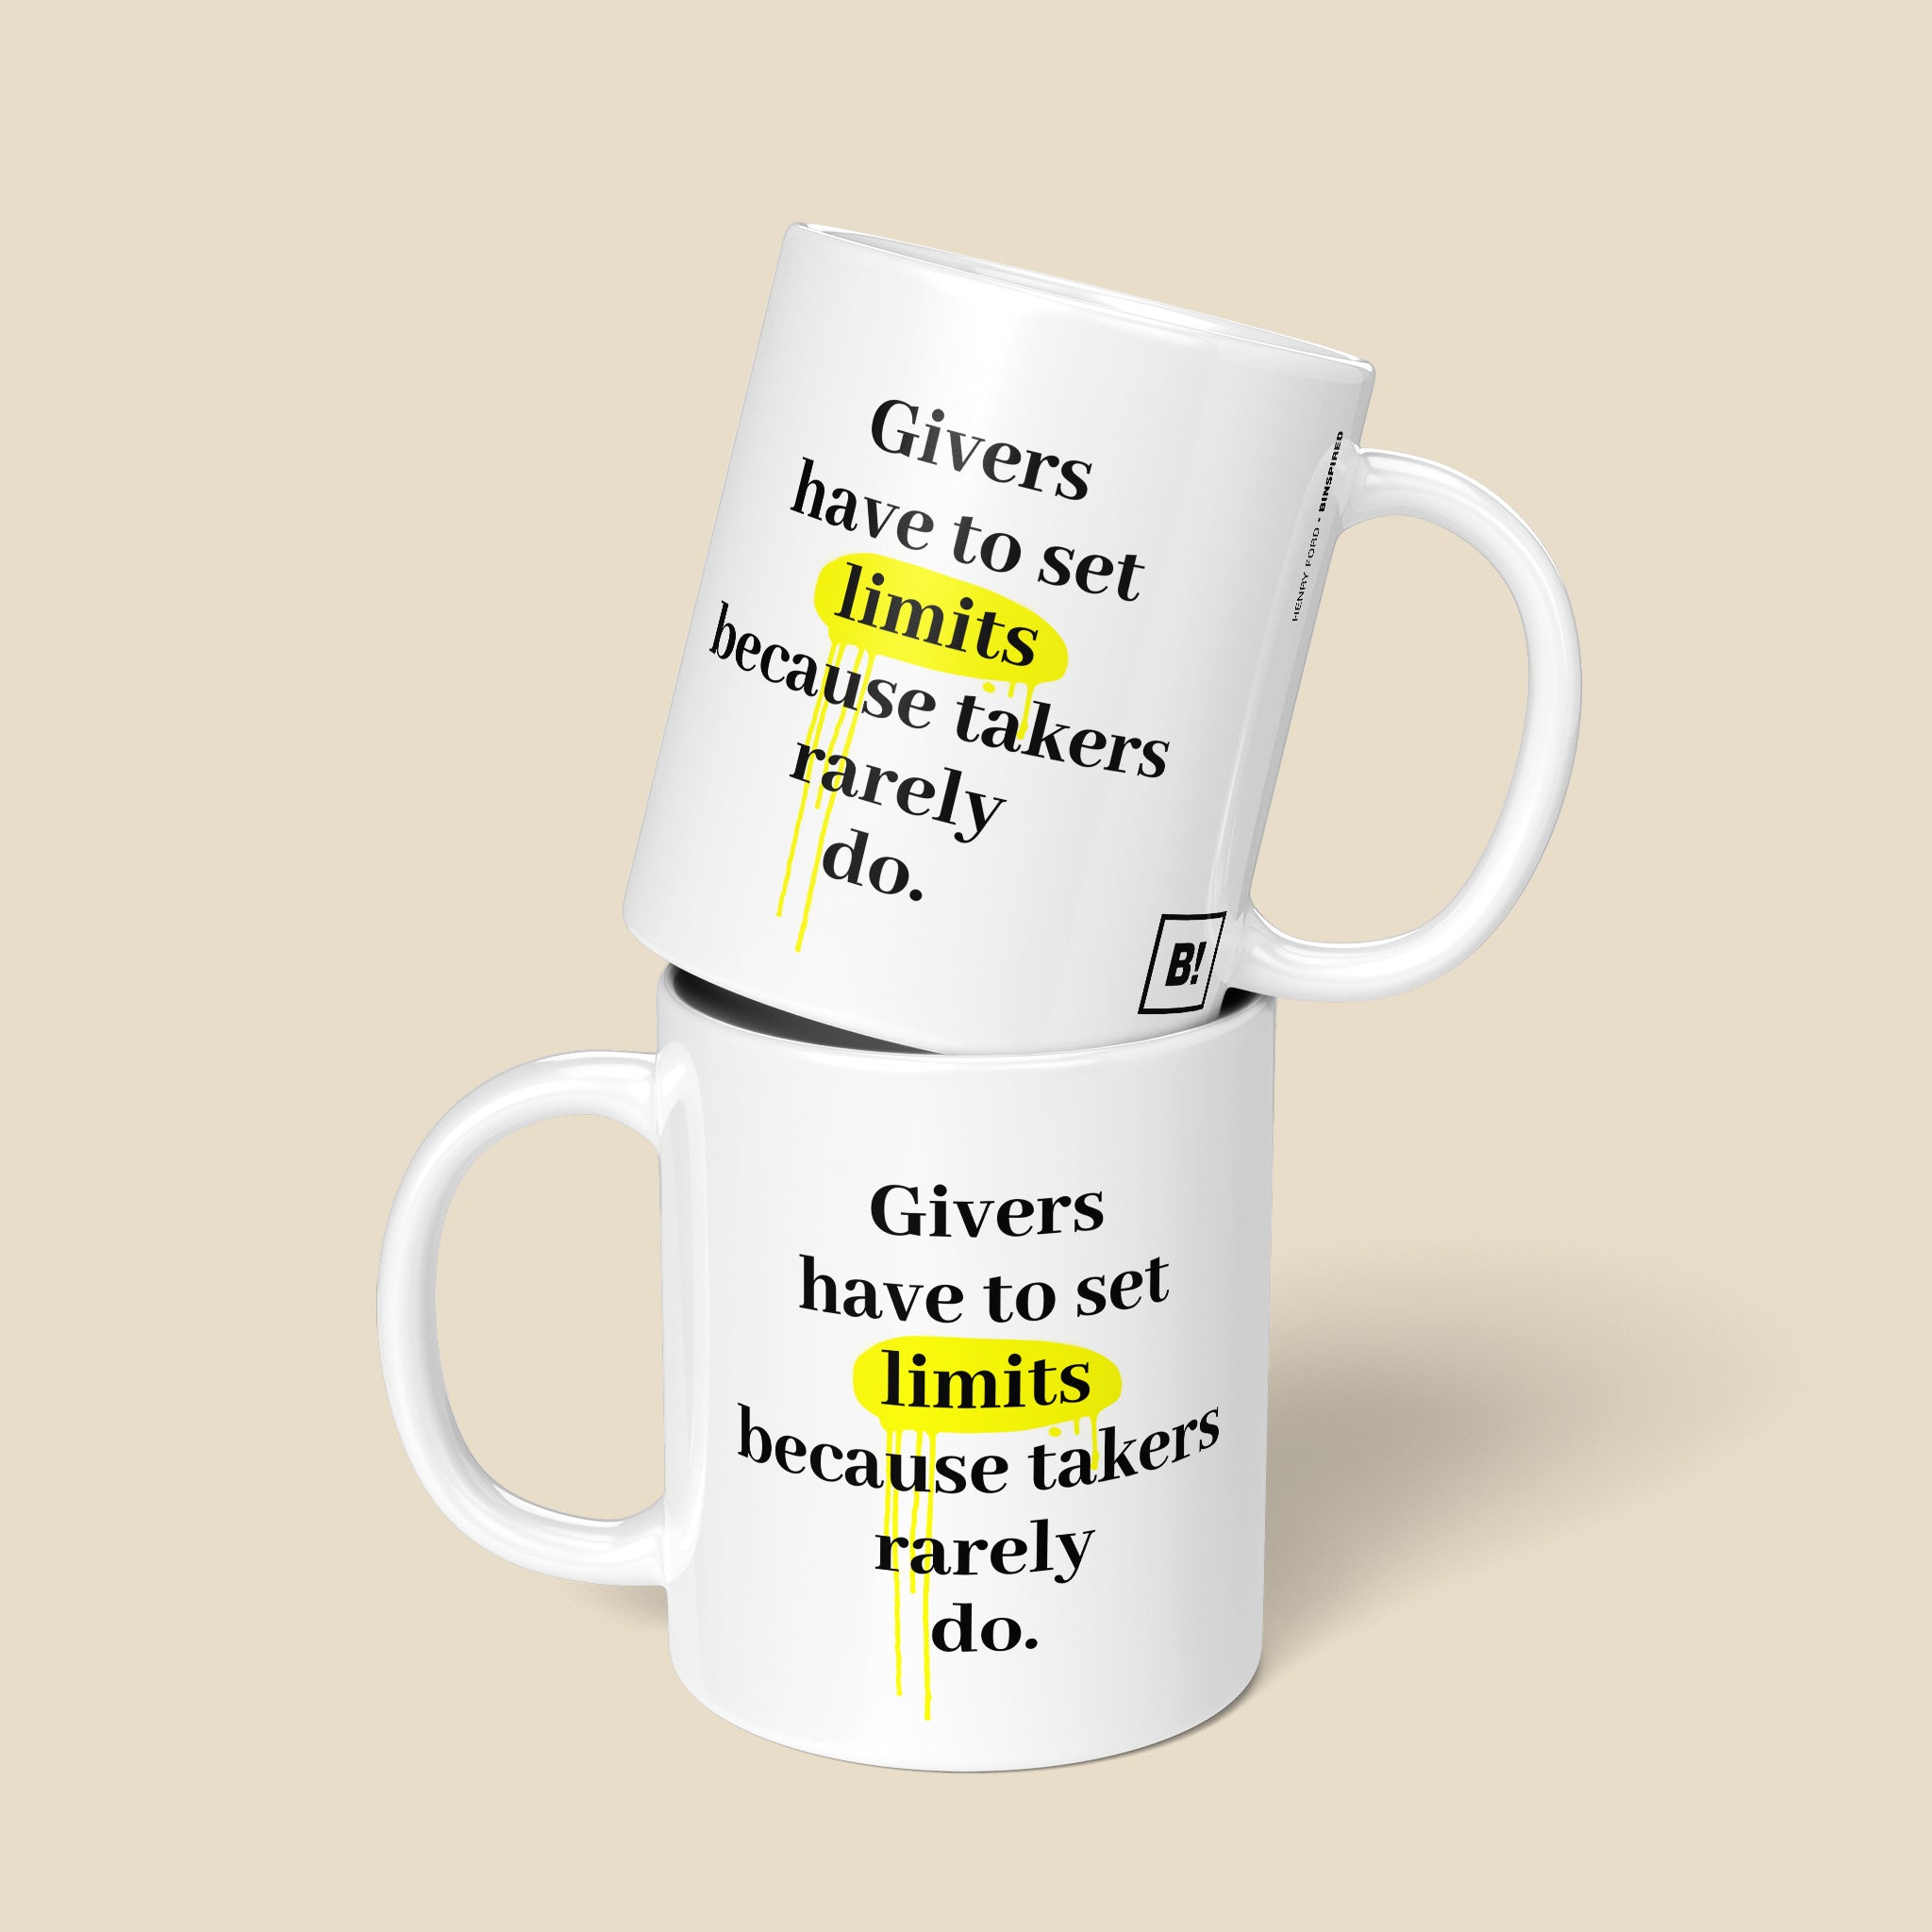 Be inspired by Henry Ford's famous quote, "Givers have to set limits because takers rarely do" on this 11oz white glossy coffee mug with a front and back view.